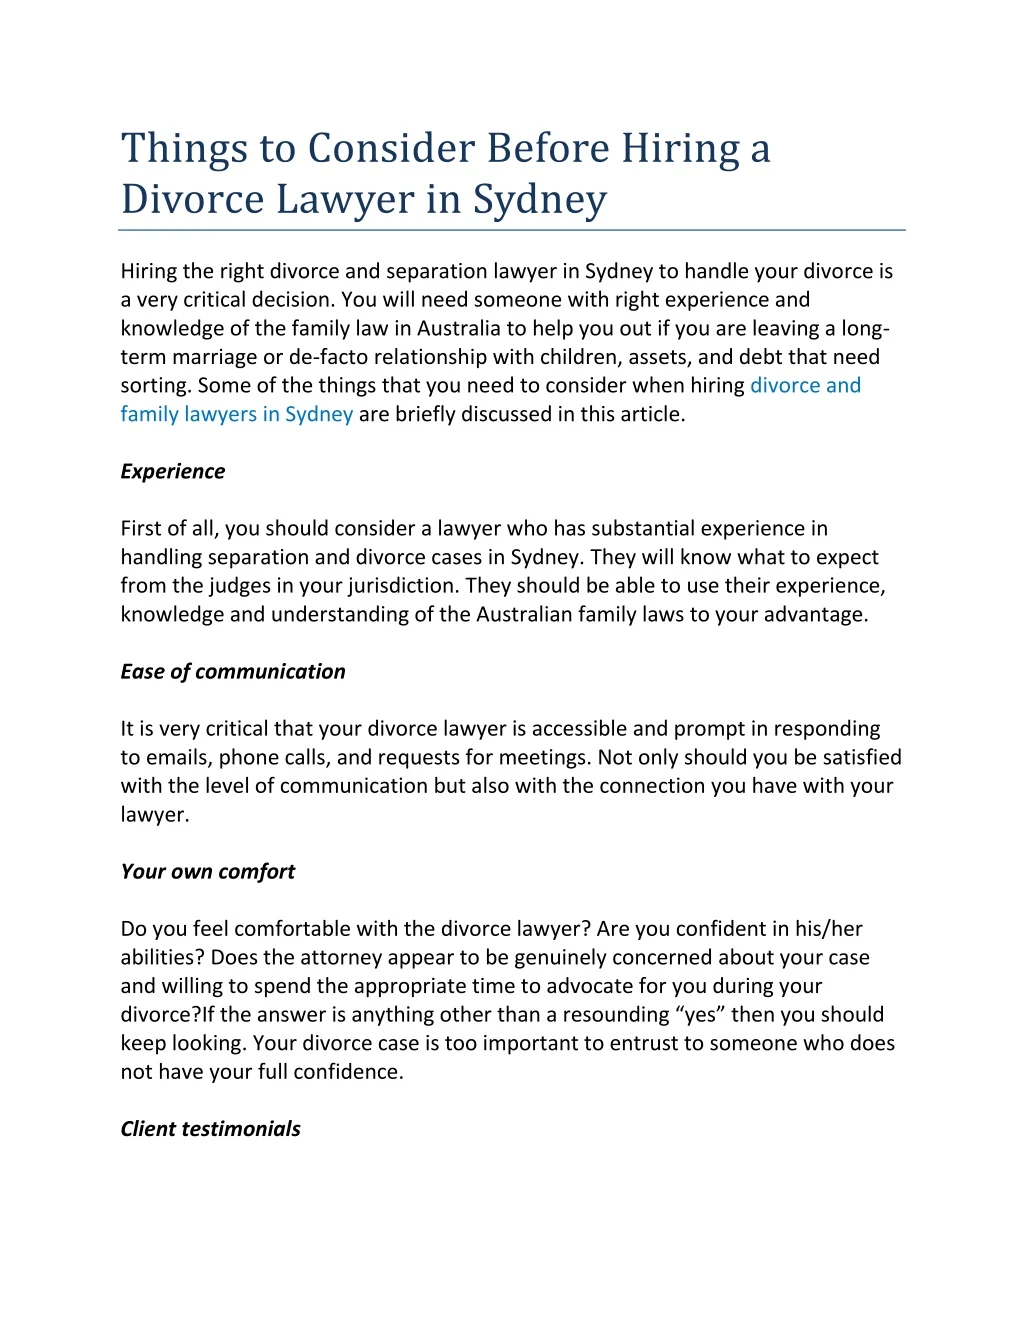 things to consider before hiring a divorce lawyer